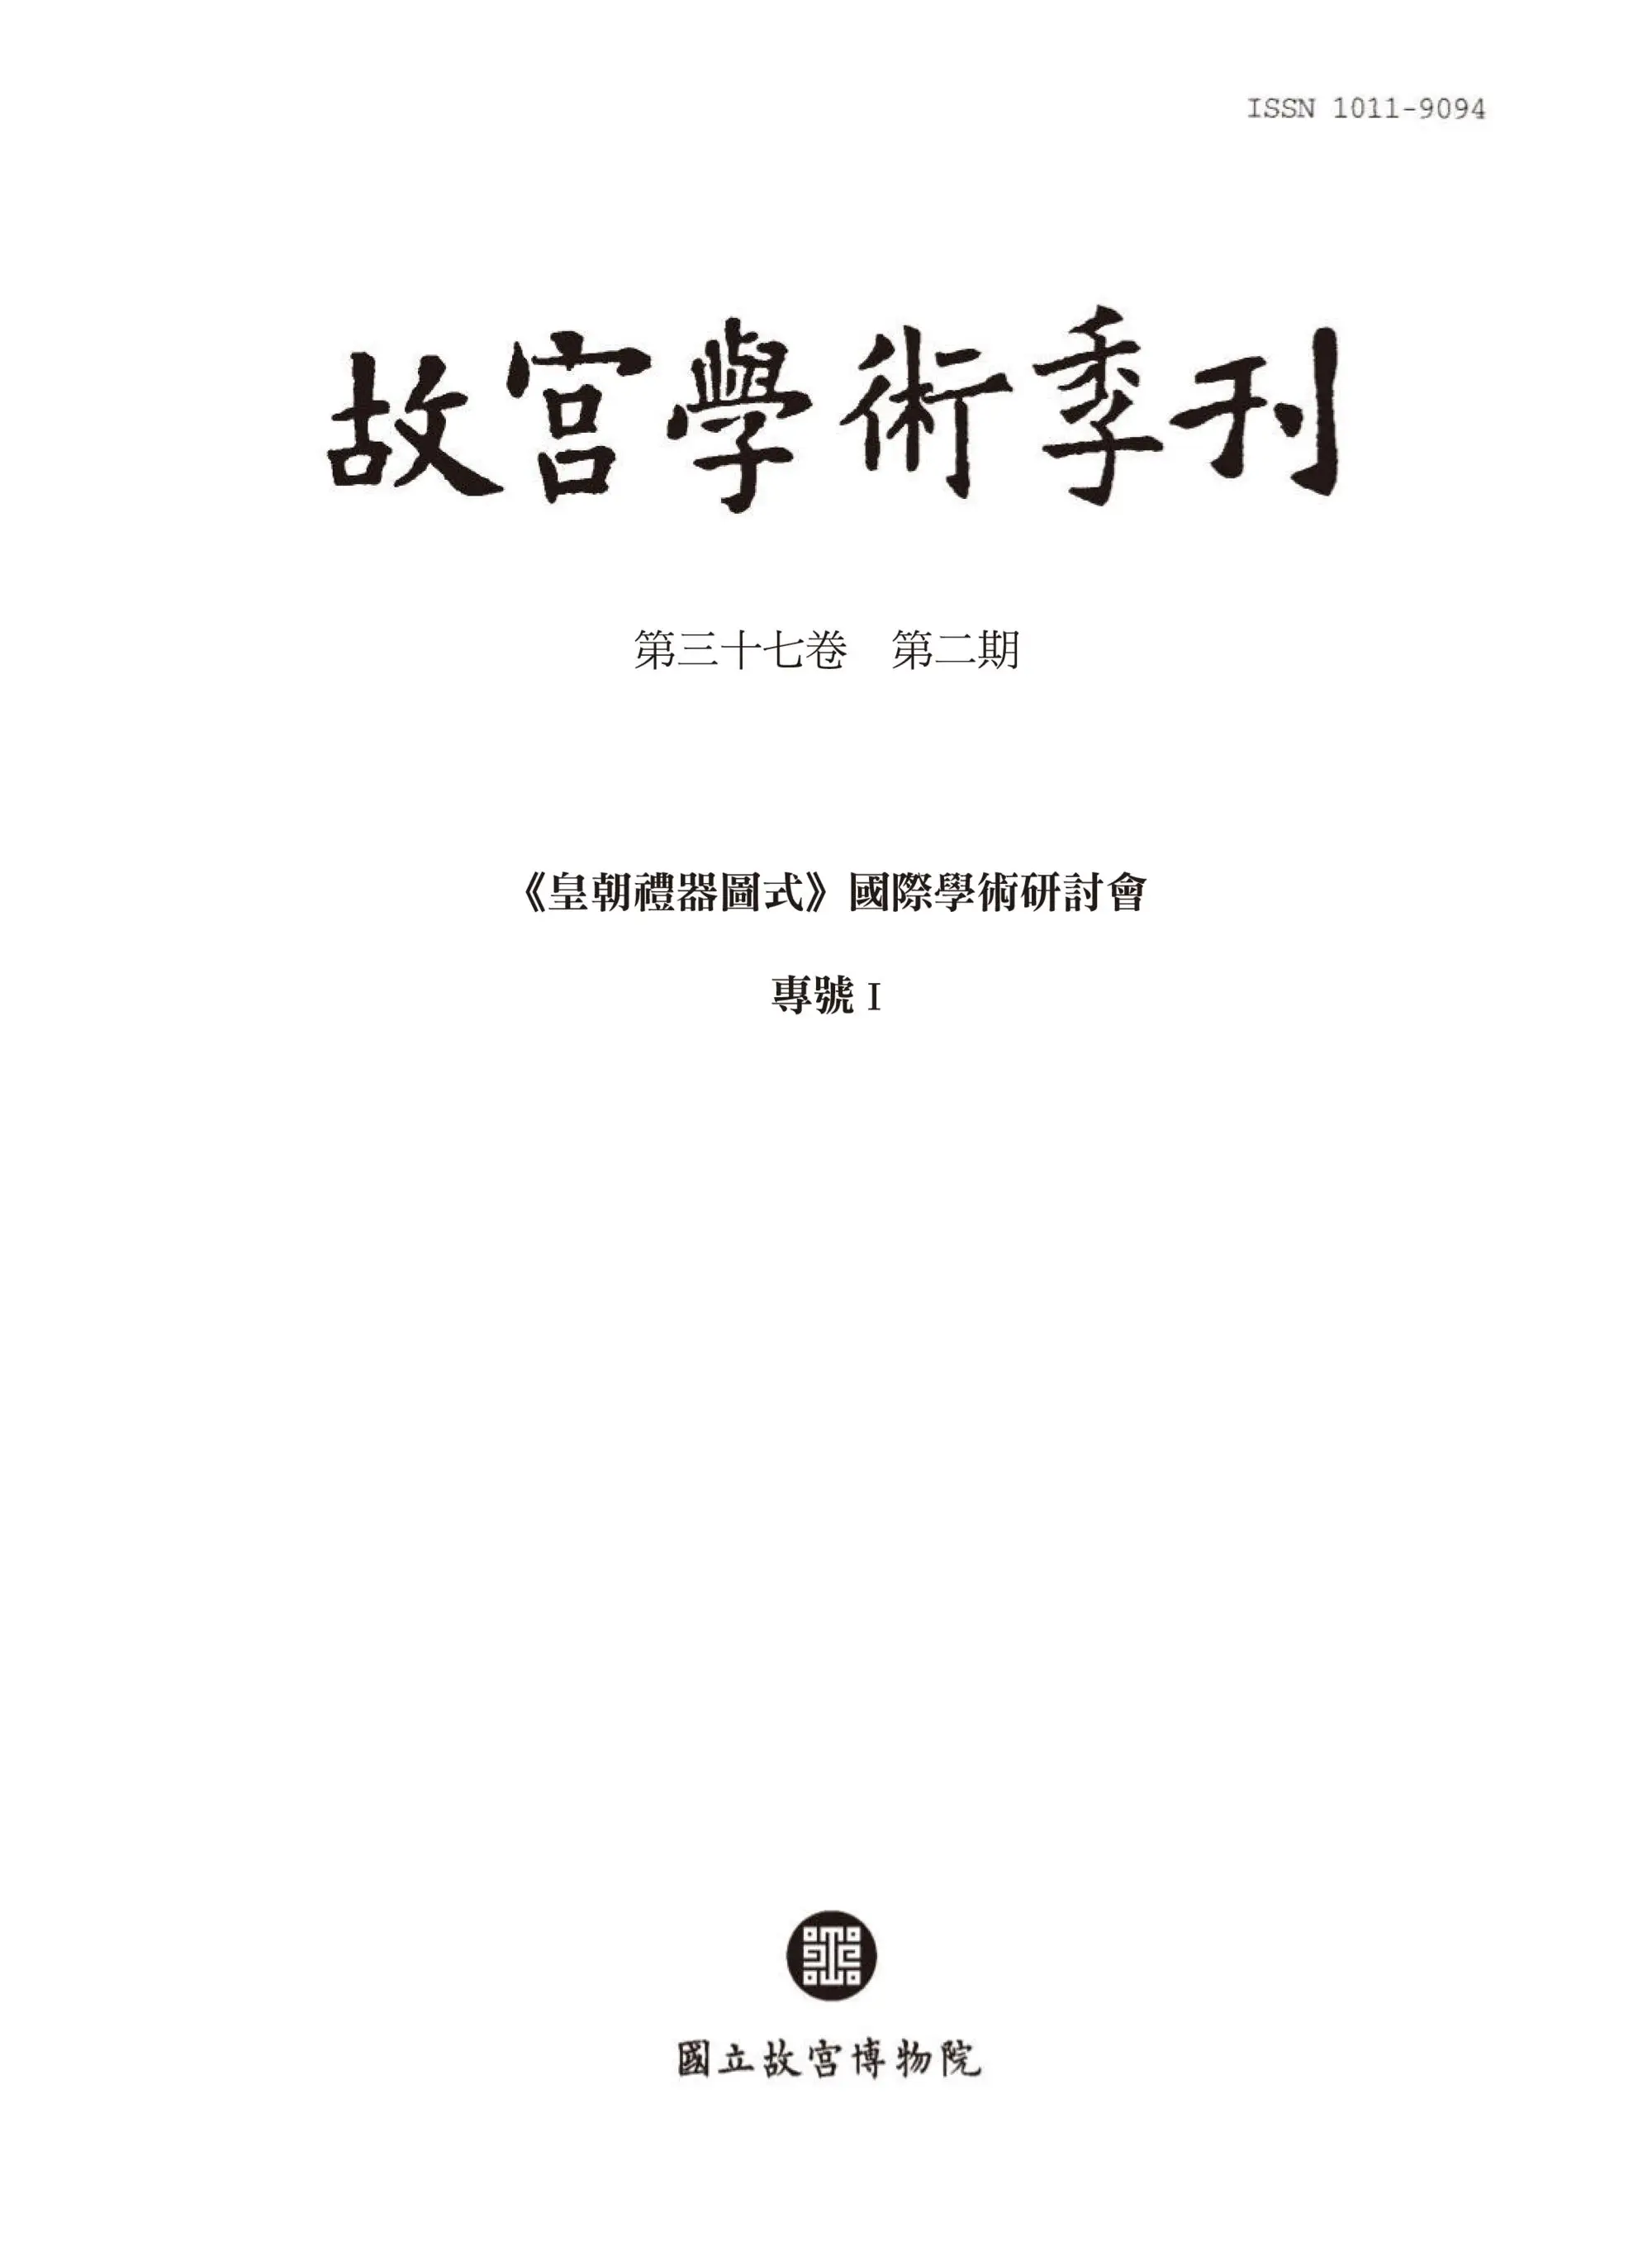 The National Palace Museum Research Quarterly 故宮學術季刊 – 01 四月 2020